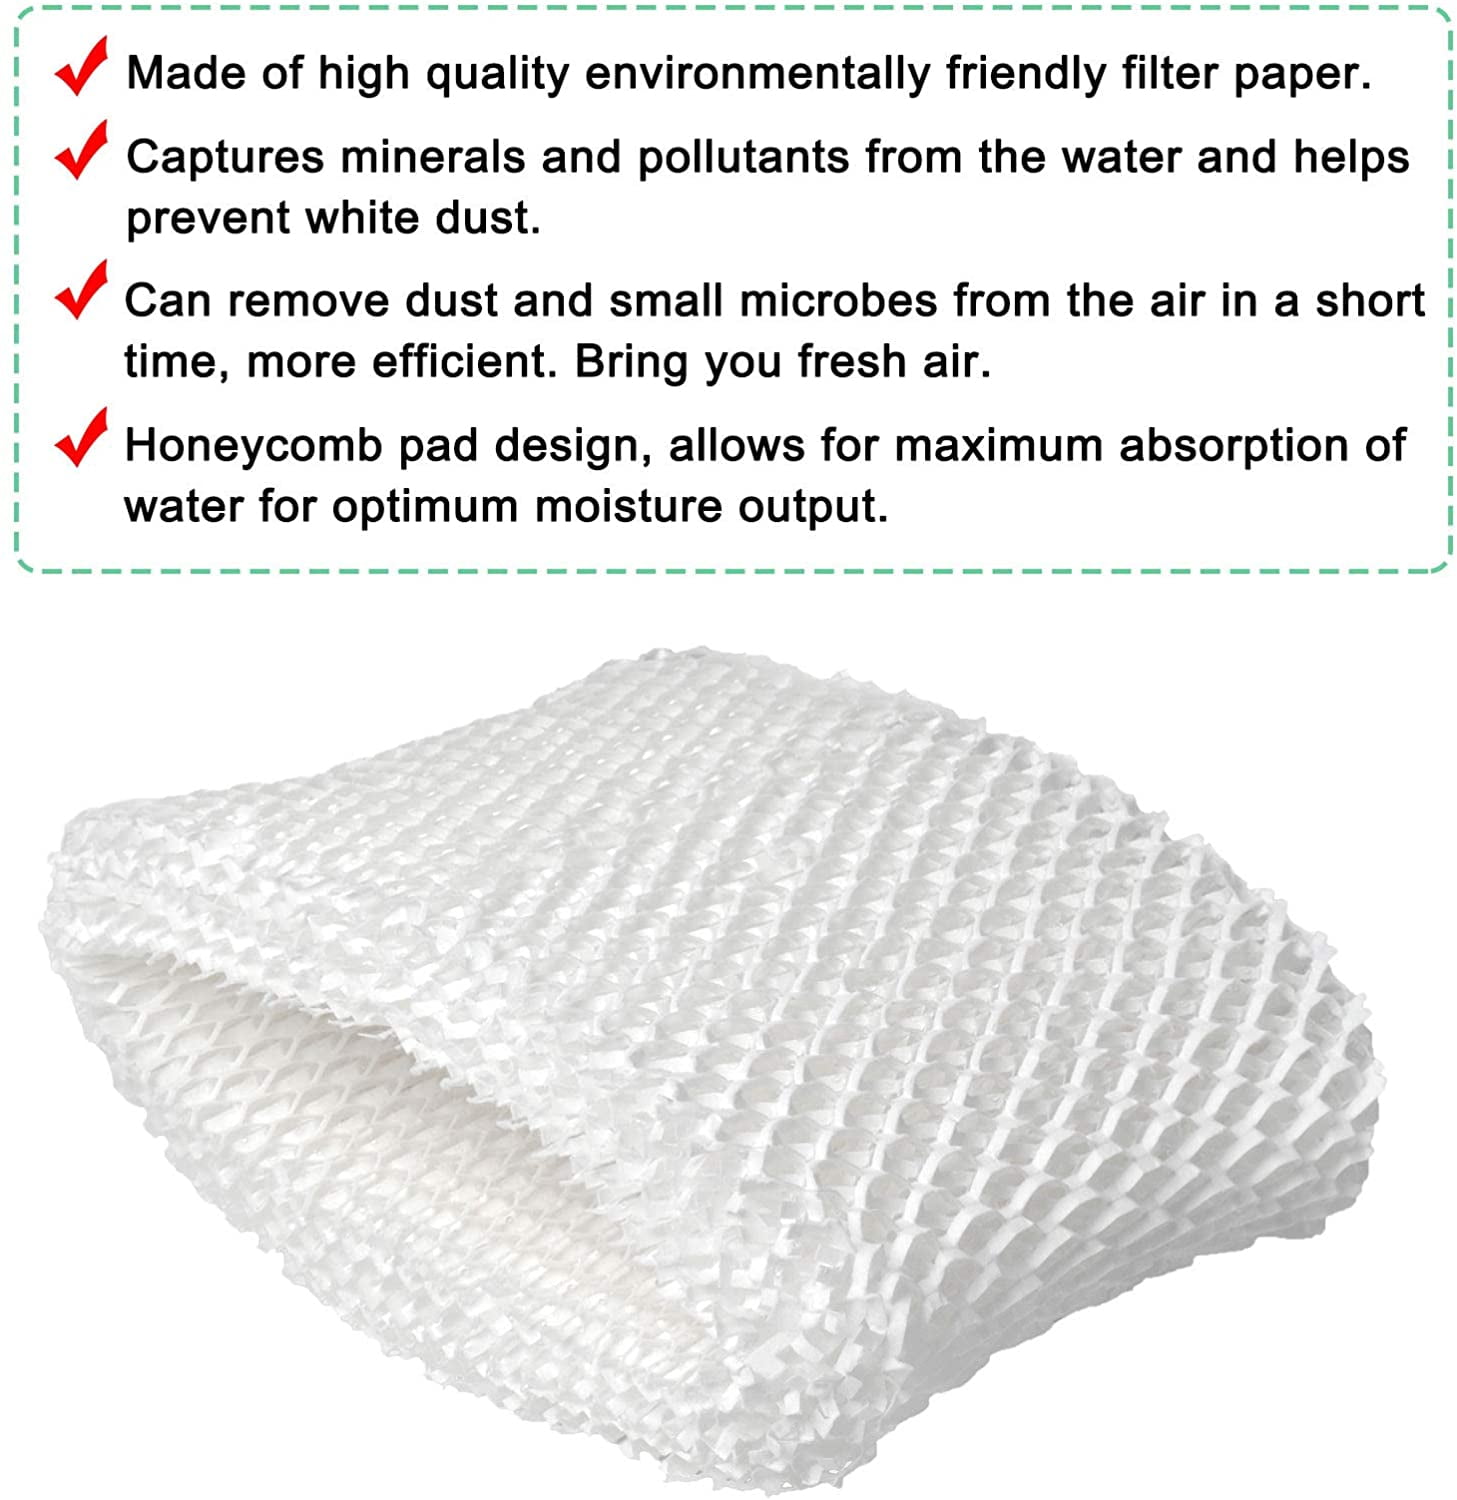 Humidifier Wicking Filter Compatible with Honeywell HCM-890 HCM-890B HEV-320 Duracraft DCM-200 DH-890 Humidifiers HC-888N Filter C 2 Pack Humidifier Filter Replacement Compatible with Honeywell HC-888 